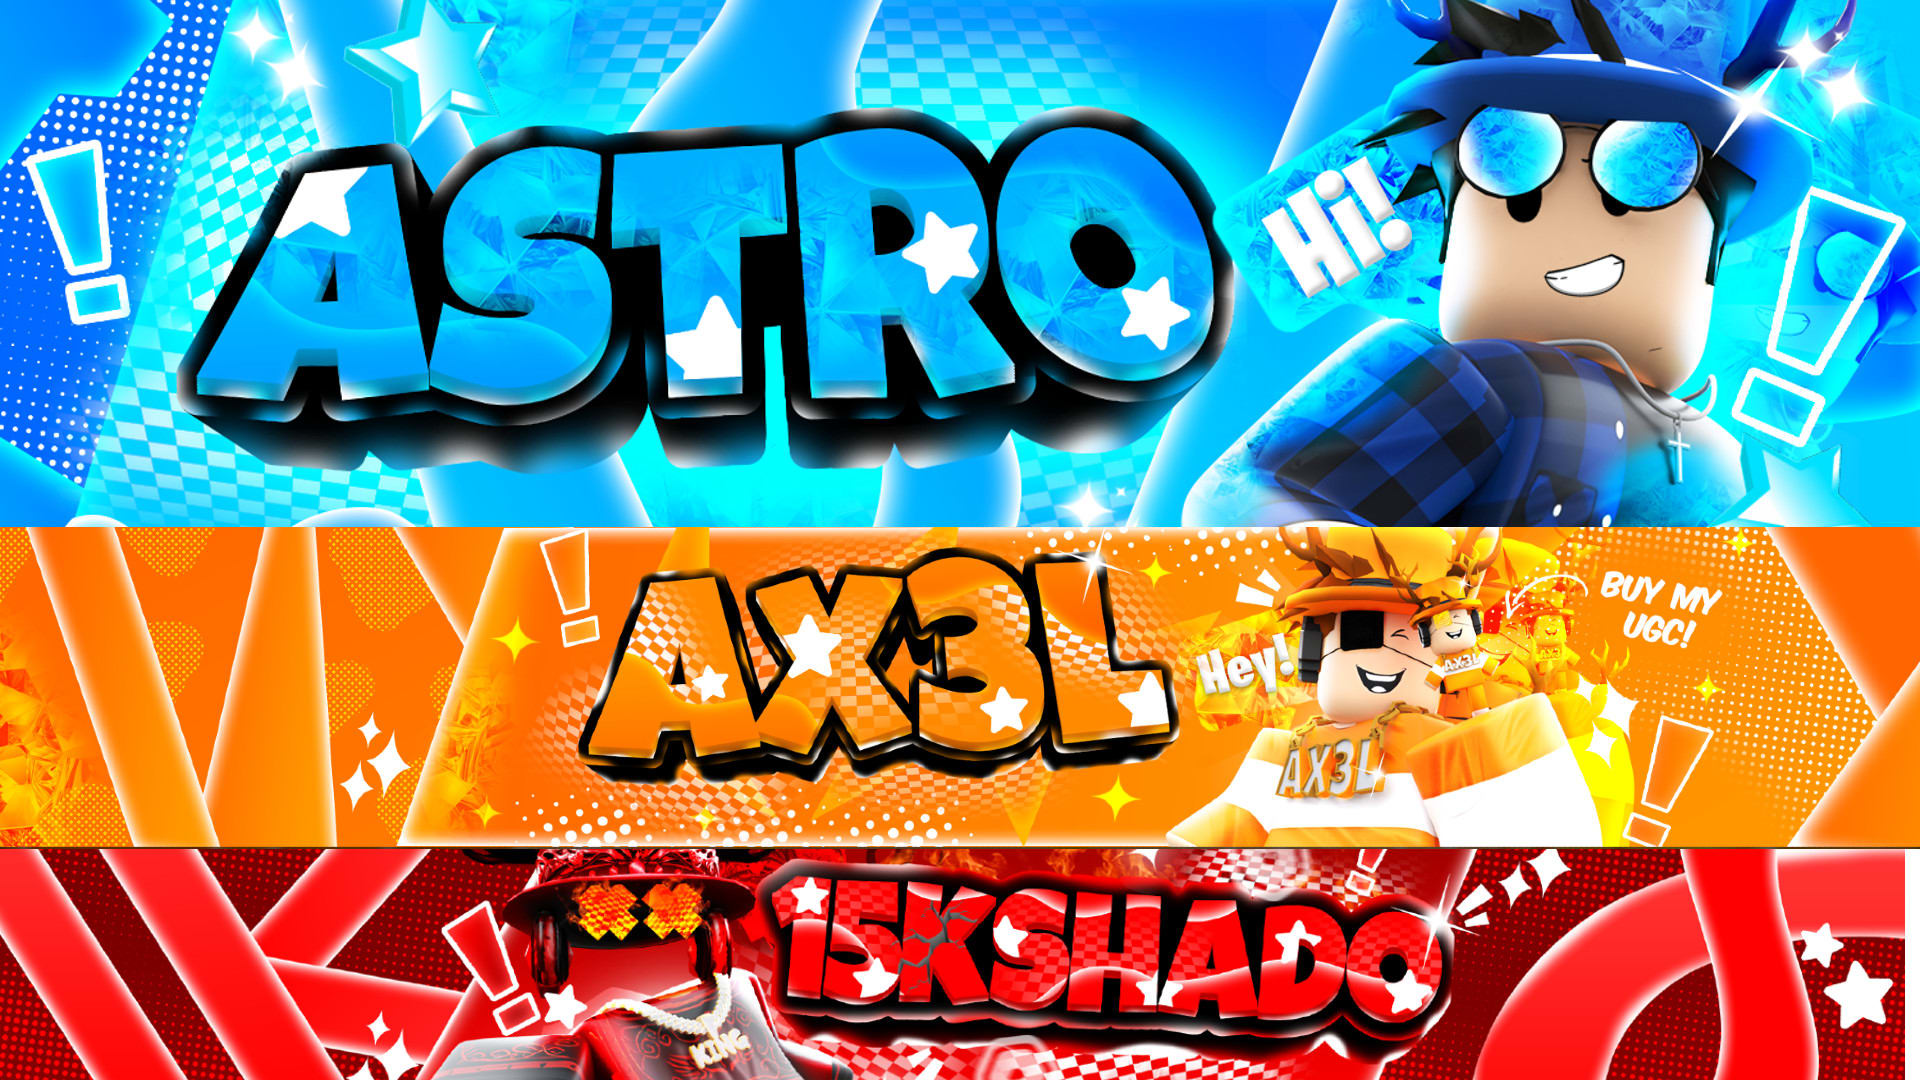 RapidsGFX  ALL comms closed در X: «Drop your Roblox skin ill rate it!  🔽rate my skin🔽  / X